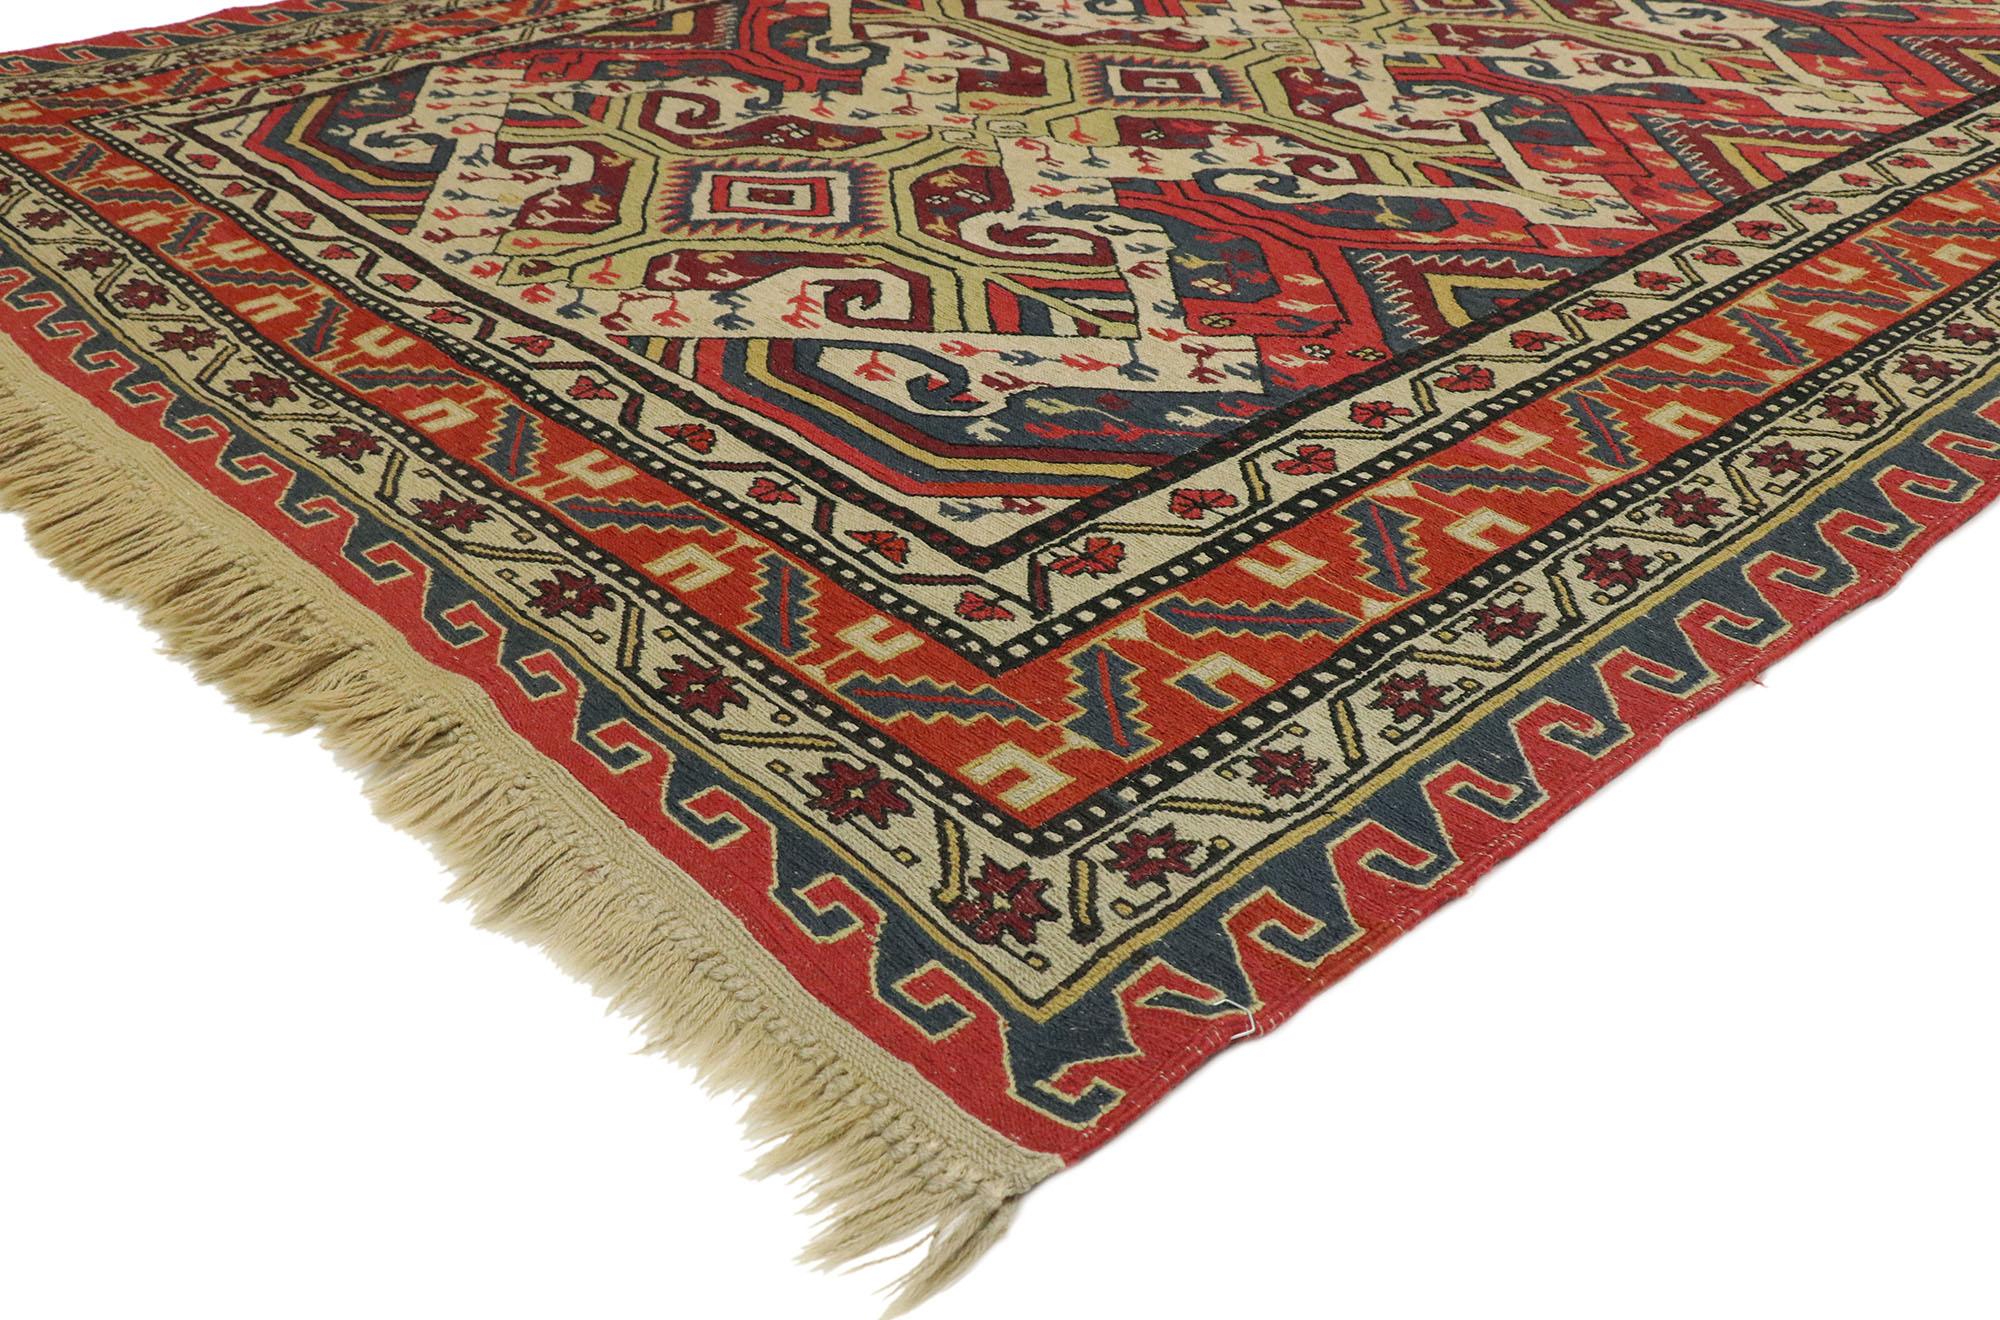 74374, antique Caucasian Soumak rug with Rustic Arts & Crafts style. With a bold geometric design and vibrant earth-tone colors, this handwoven wool antique Caucasian Soumak rug beautifully embodies Arts & Crafts Style with modern rustic